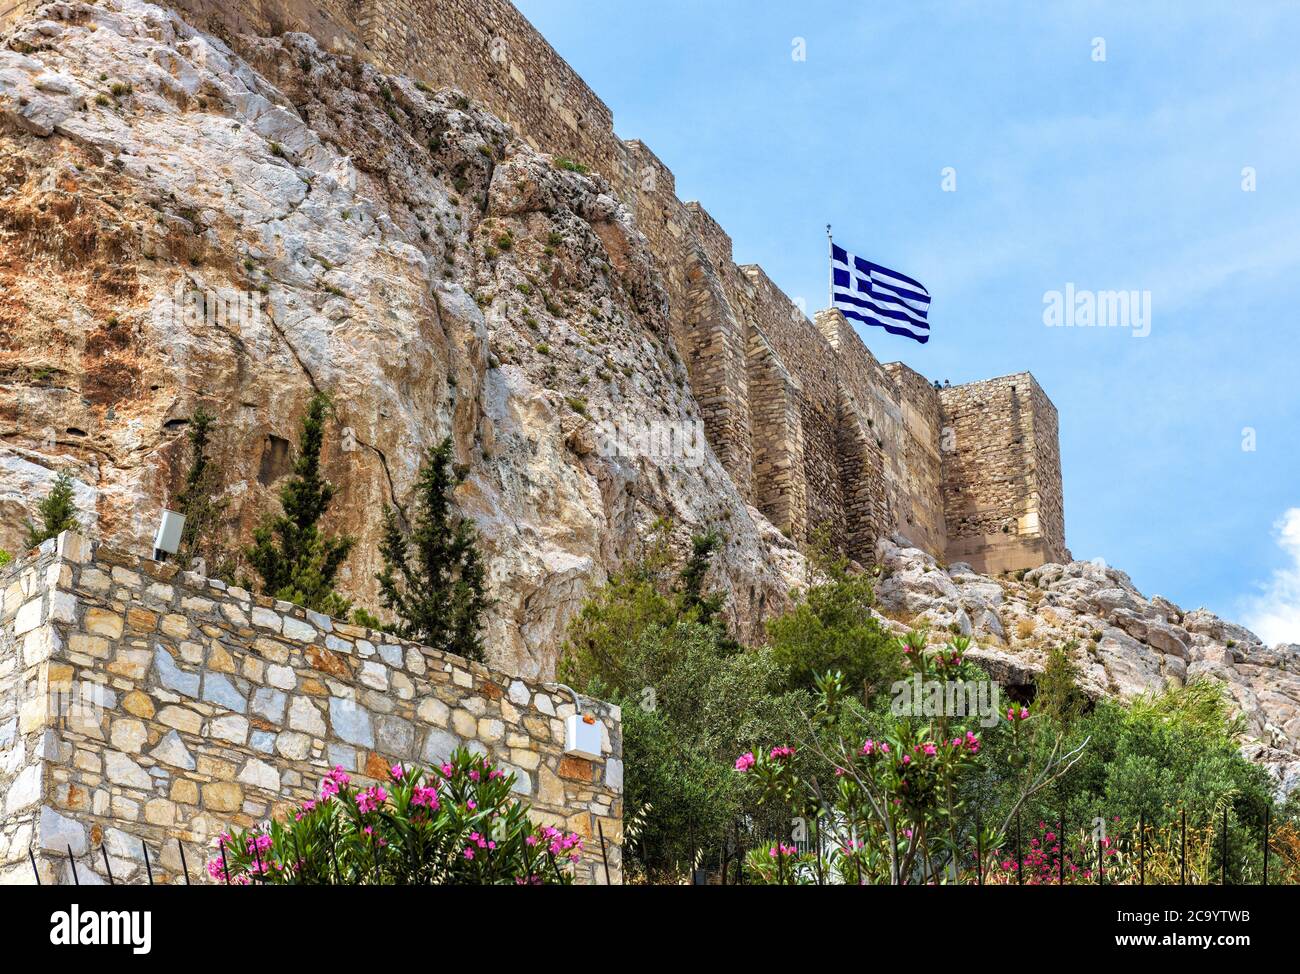 Acropolis with strong medieval fortress walls, Athens, Greece. Famous Acropolis hill is top landmark of Athens city. Scenic view of old castle and Anc Stock Photo